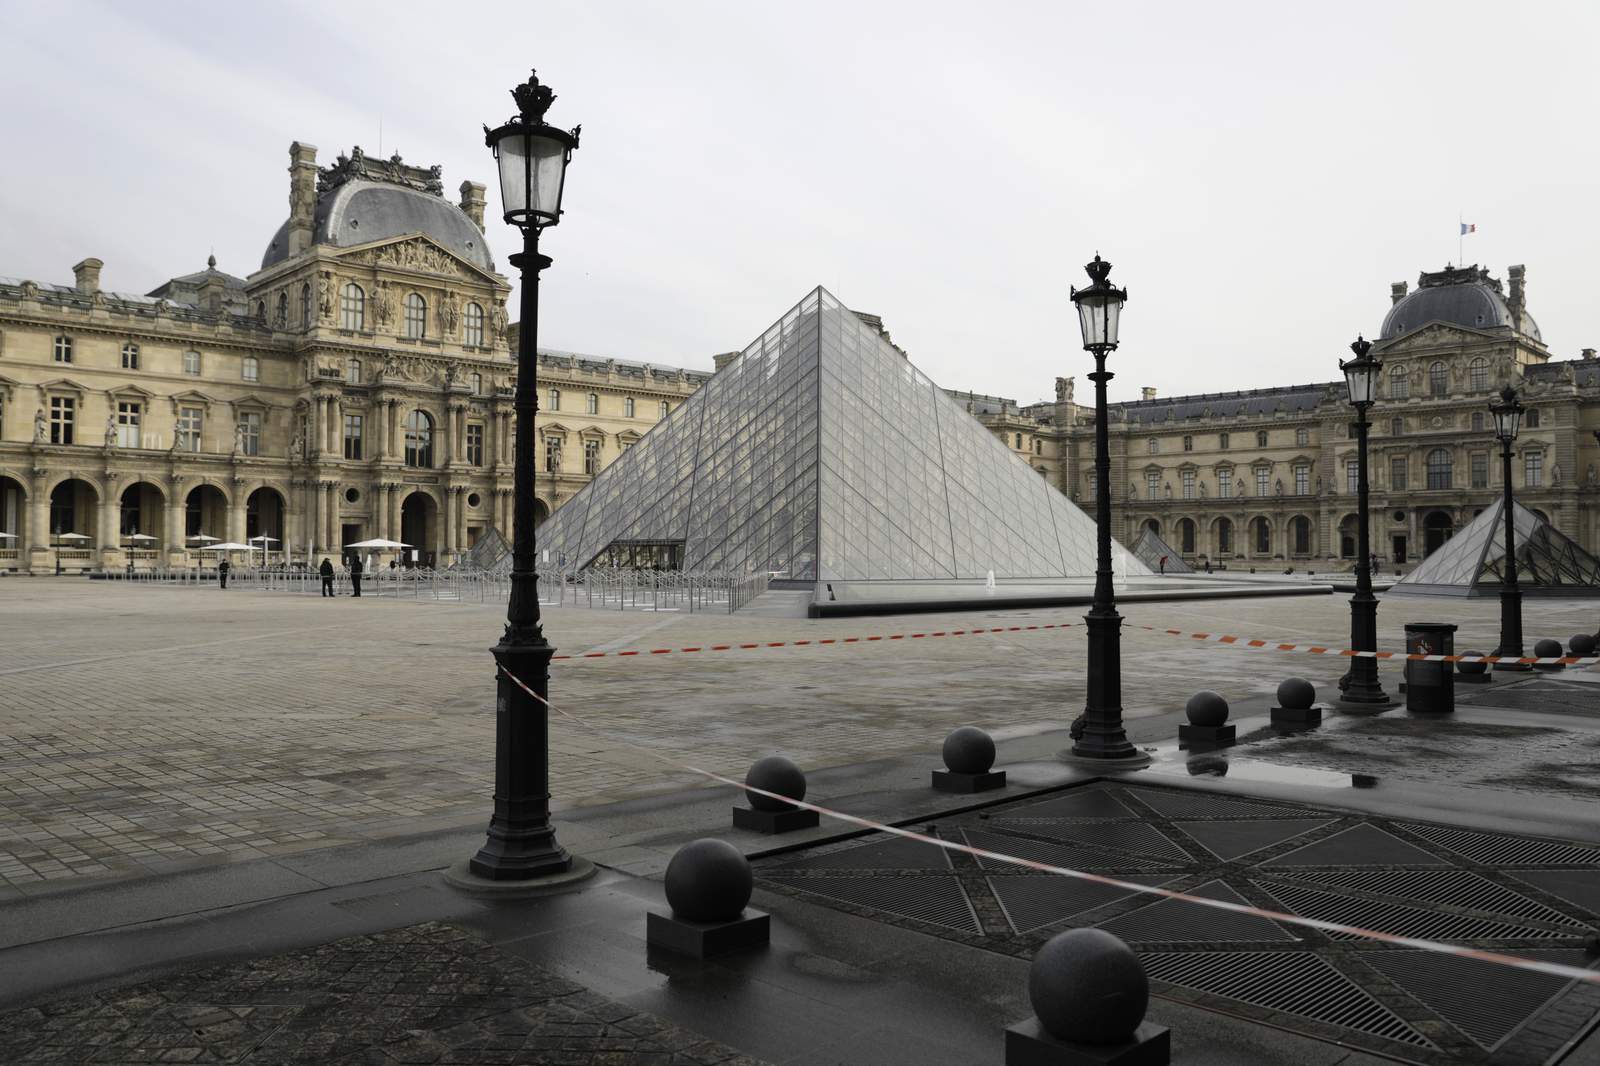 No travel needed: Louvre puts its collection online